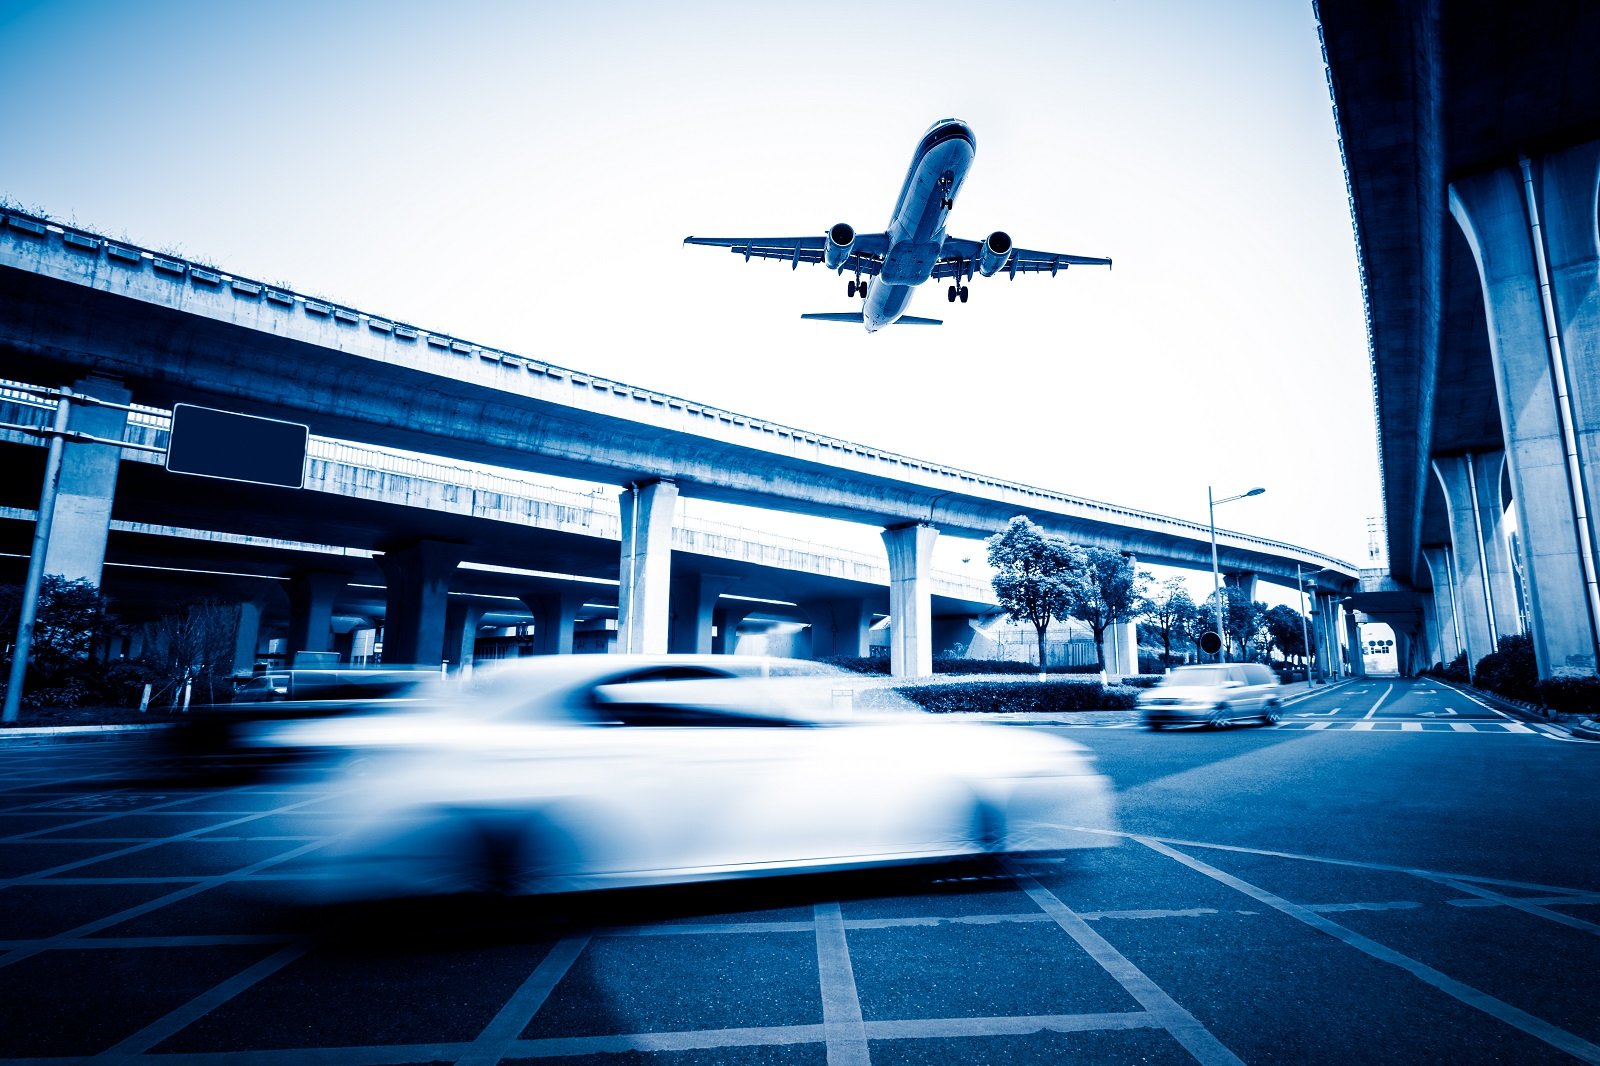 blurred-street-scene-in-city-with-a-plane-flying-over